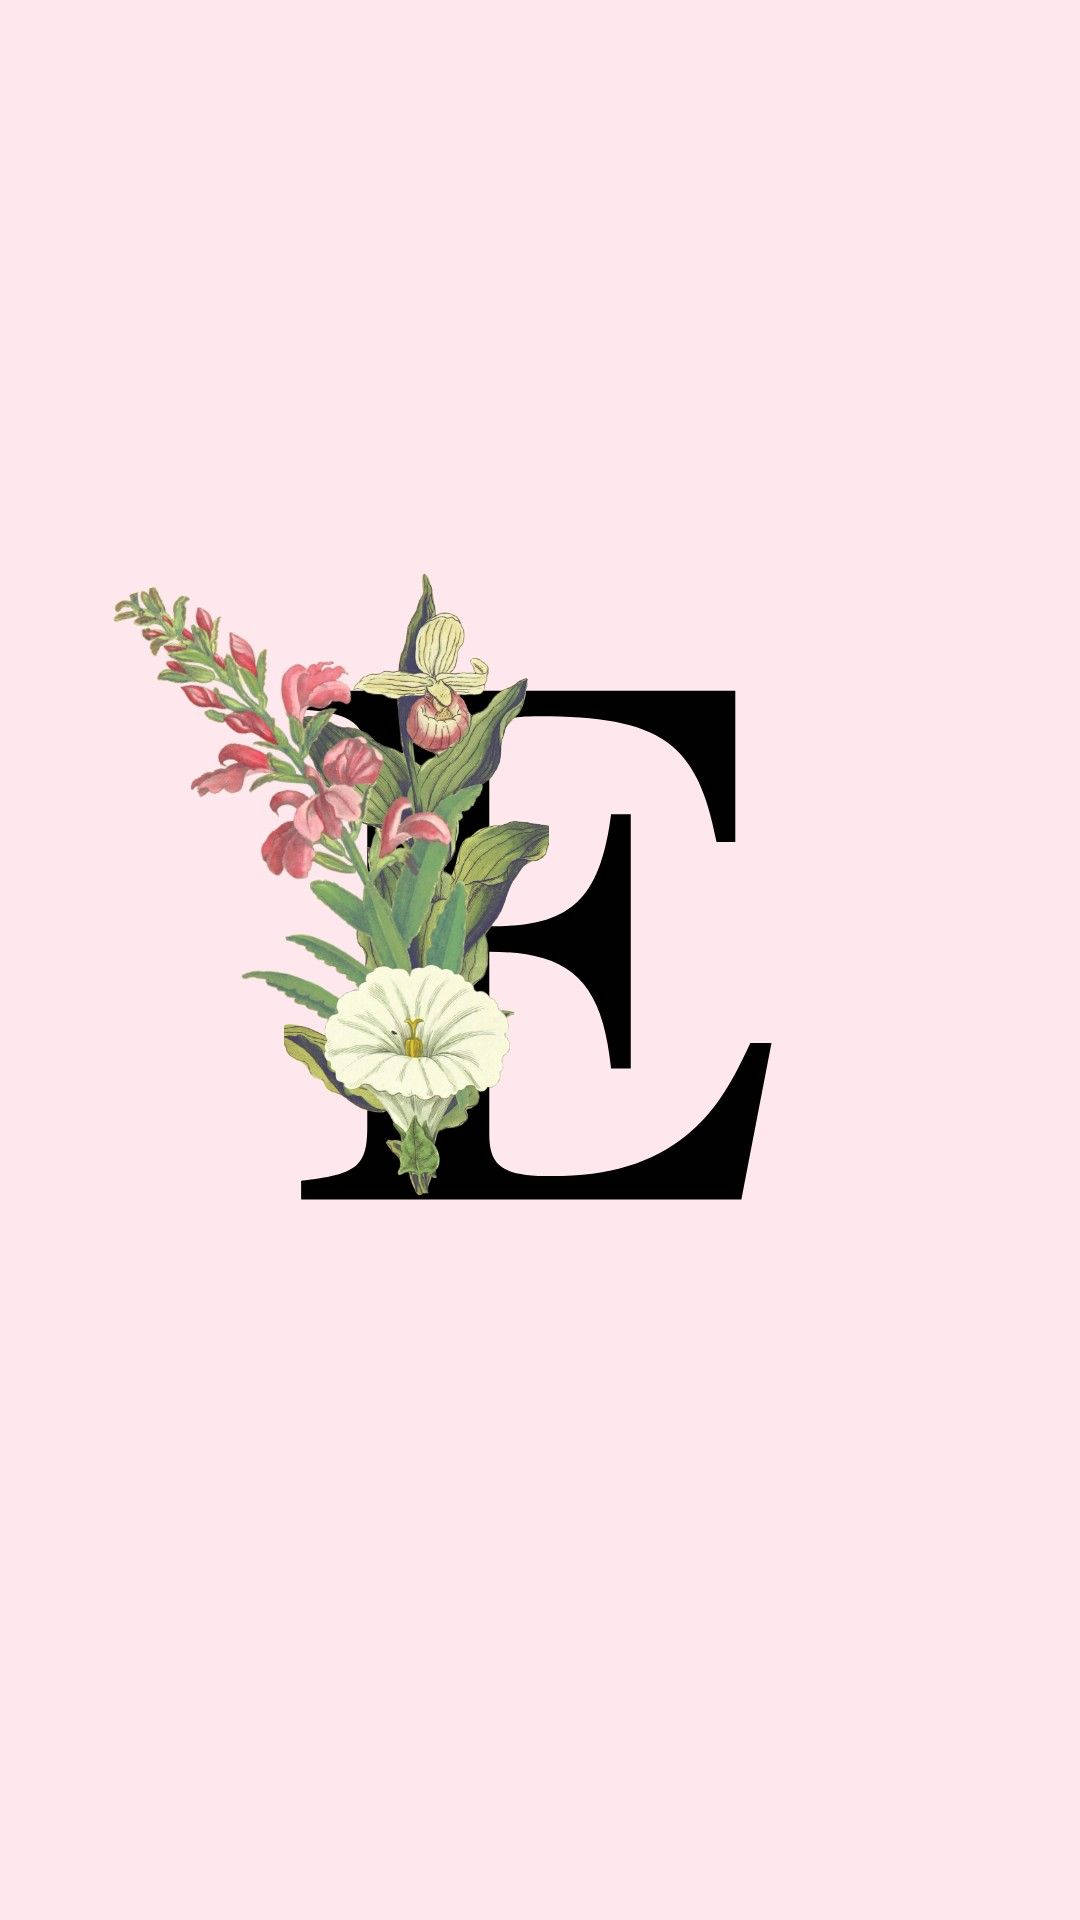 Black Letter E With Flowers